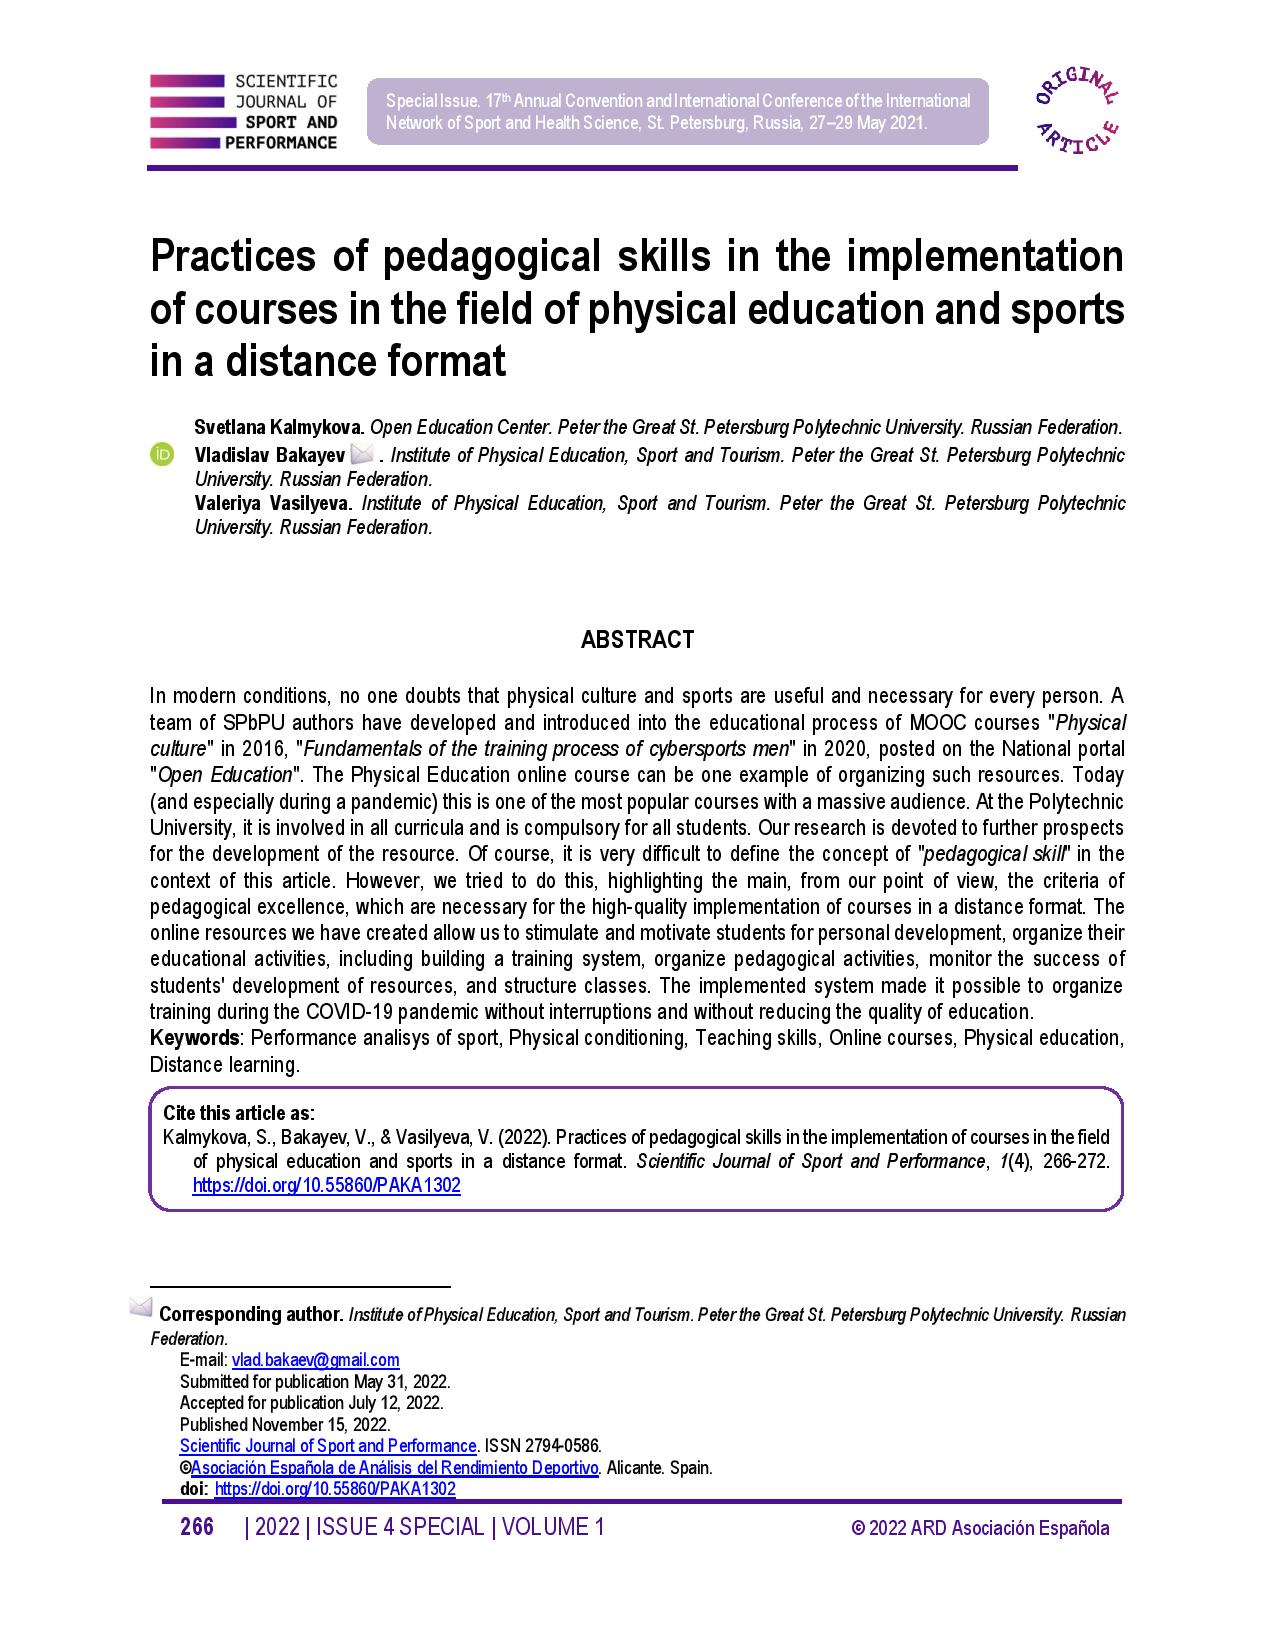 Practices of pedagogical skills in the implementation of courses in the field of physical education and sports in a distance format